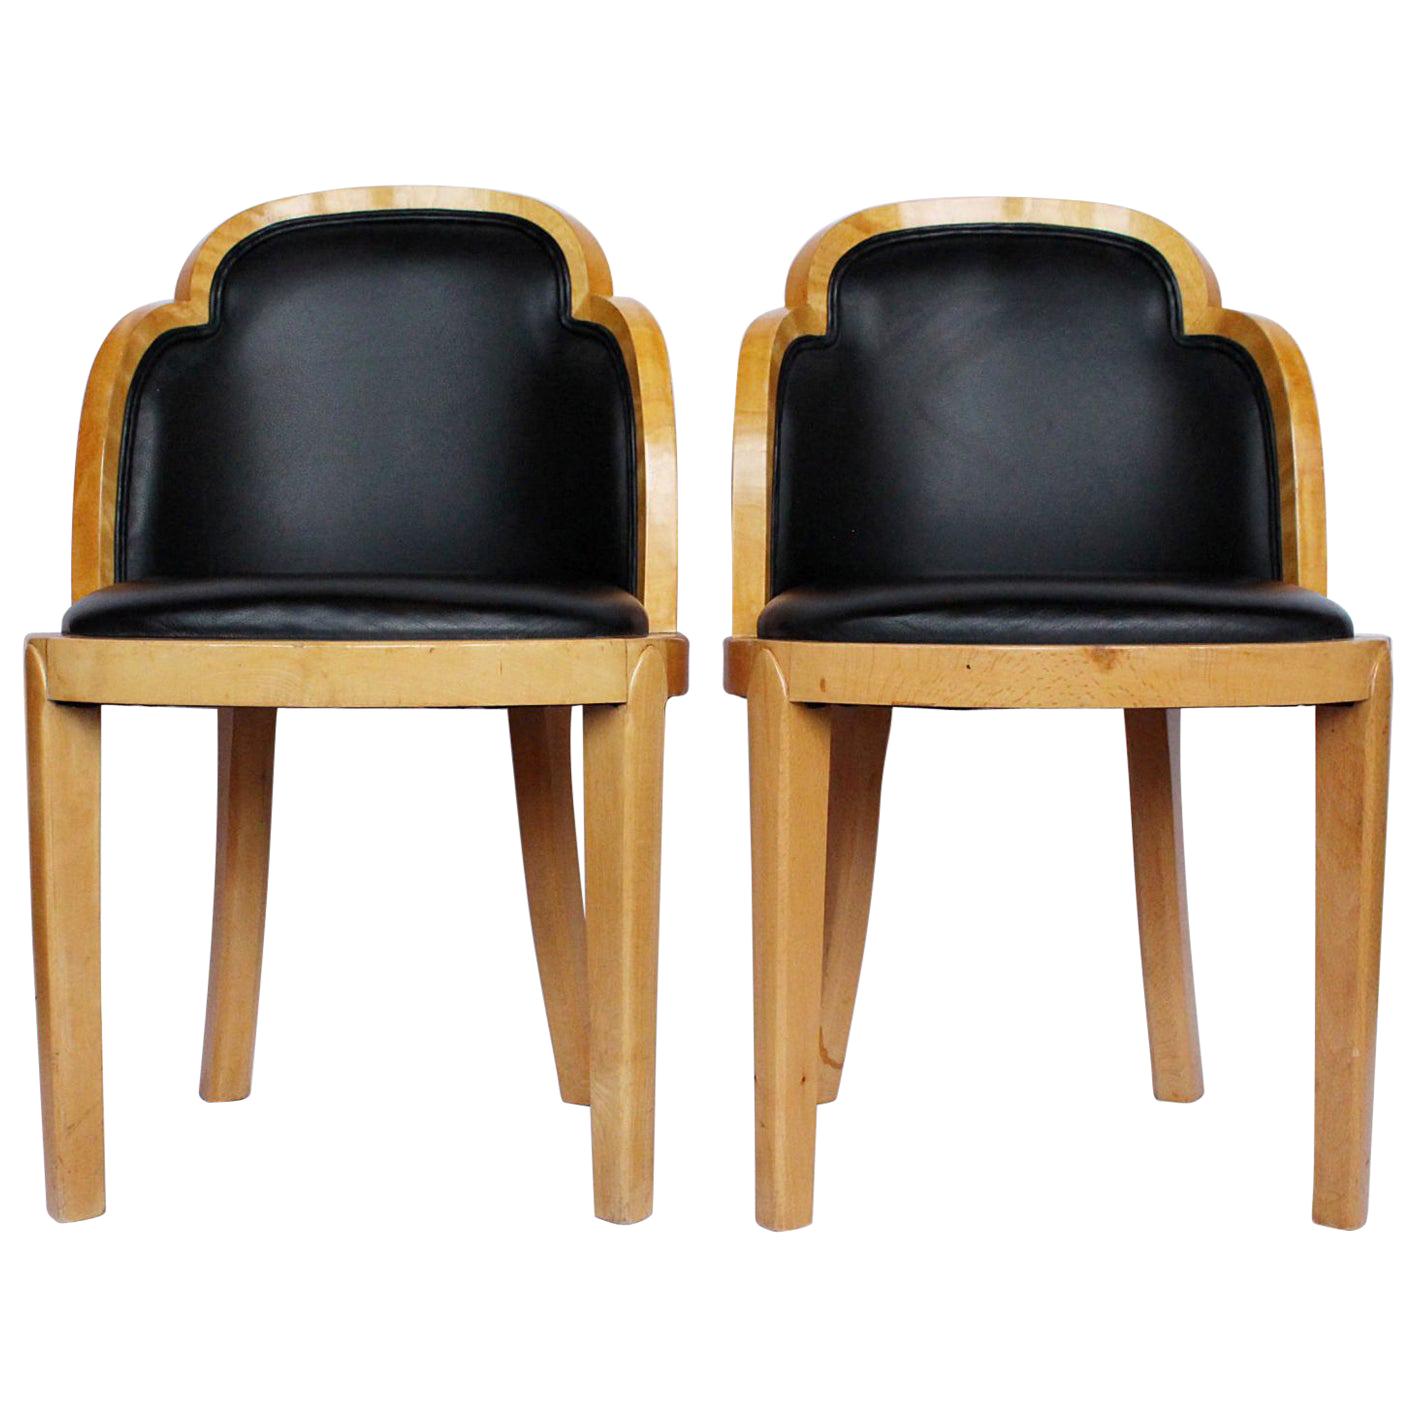 Pair of Art Deco Side Chairs. Satin Wood & Black Leather Cloud Back Design 1930